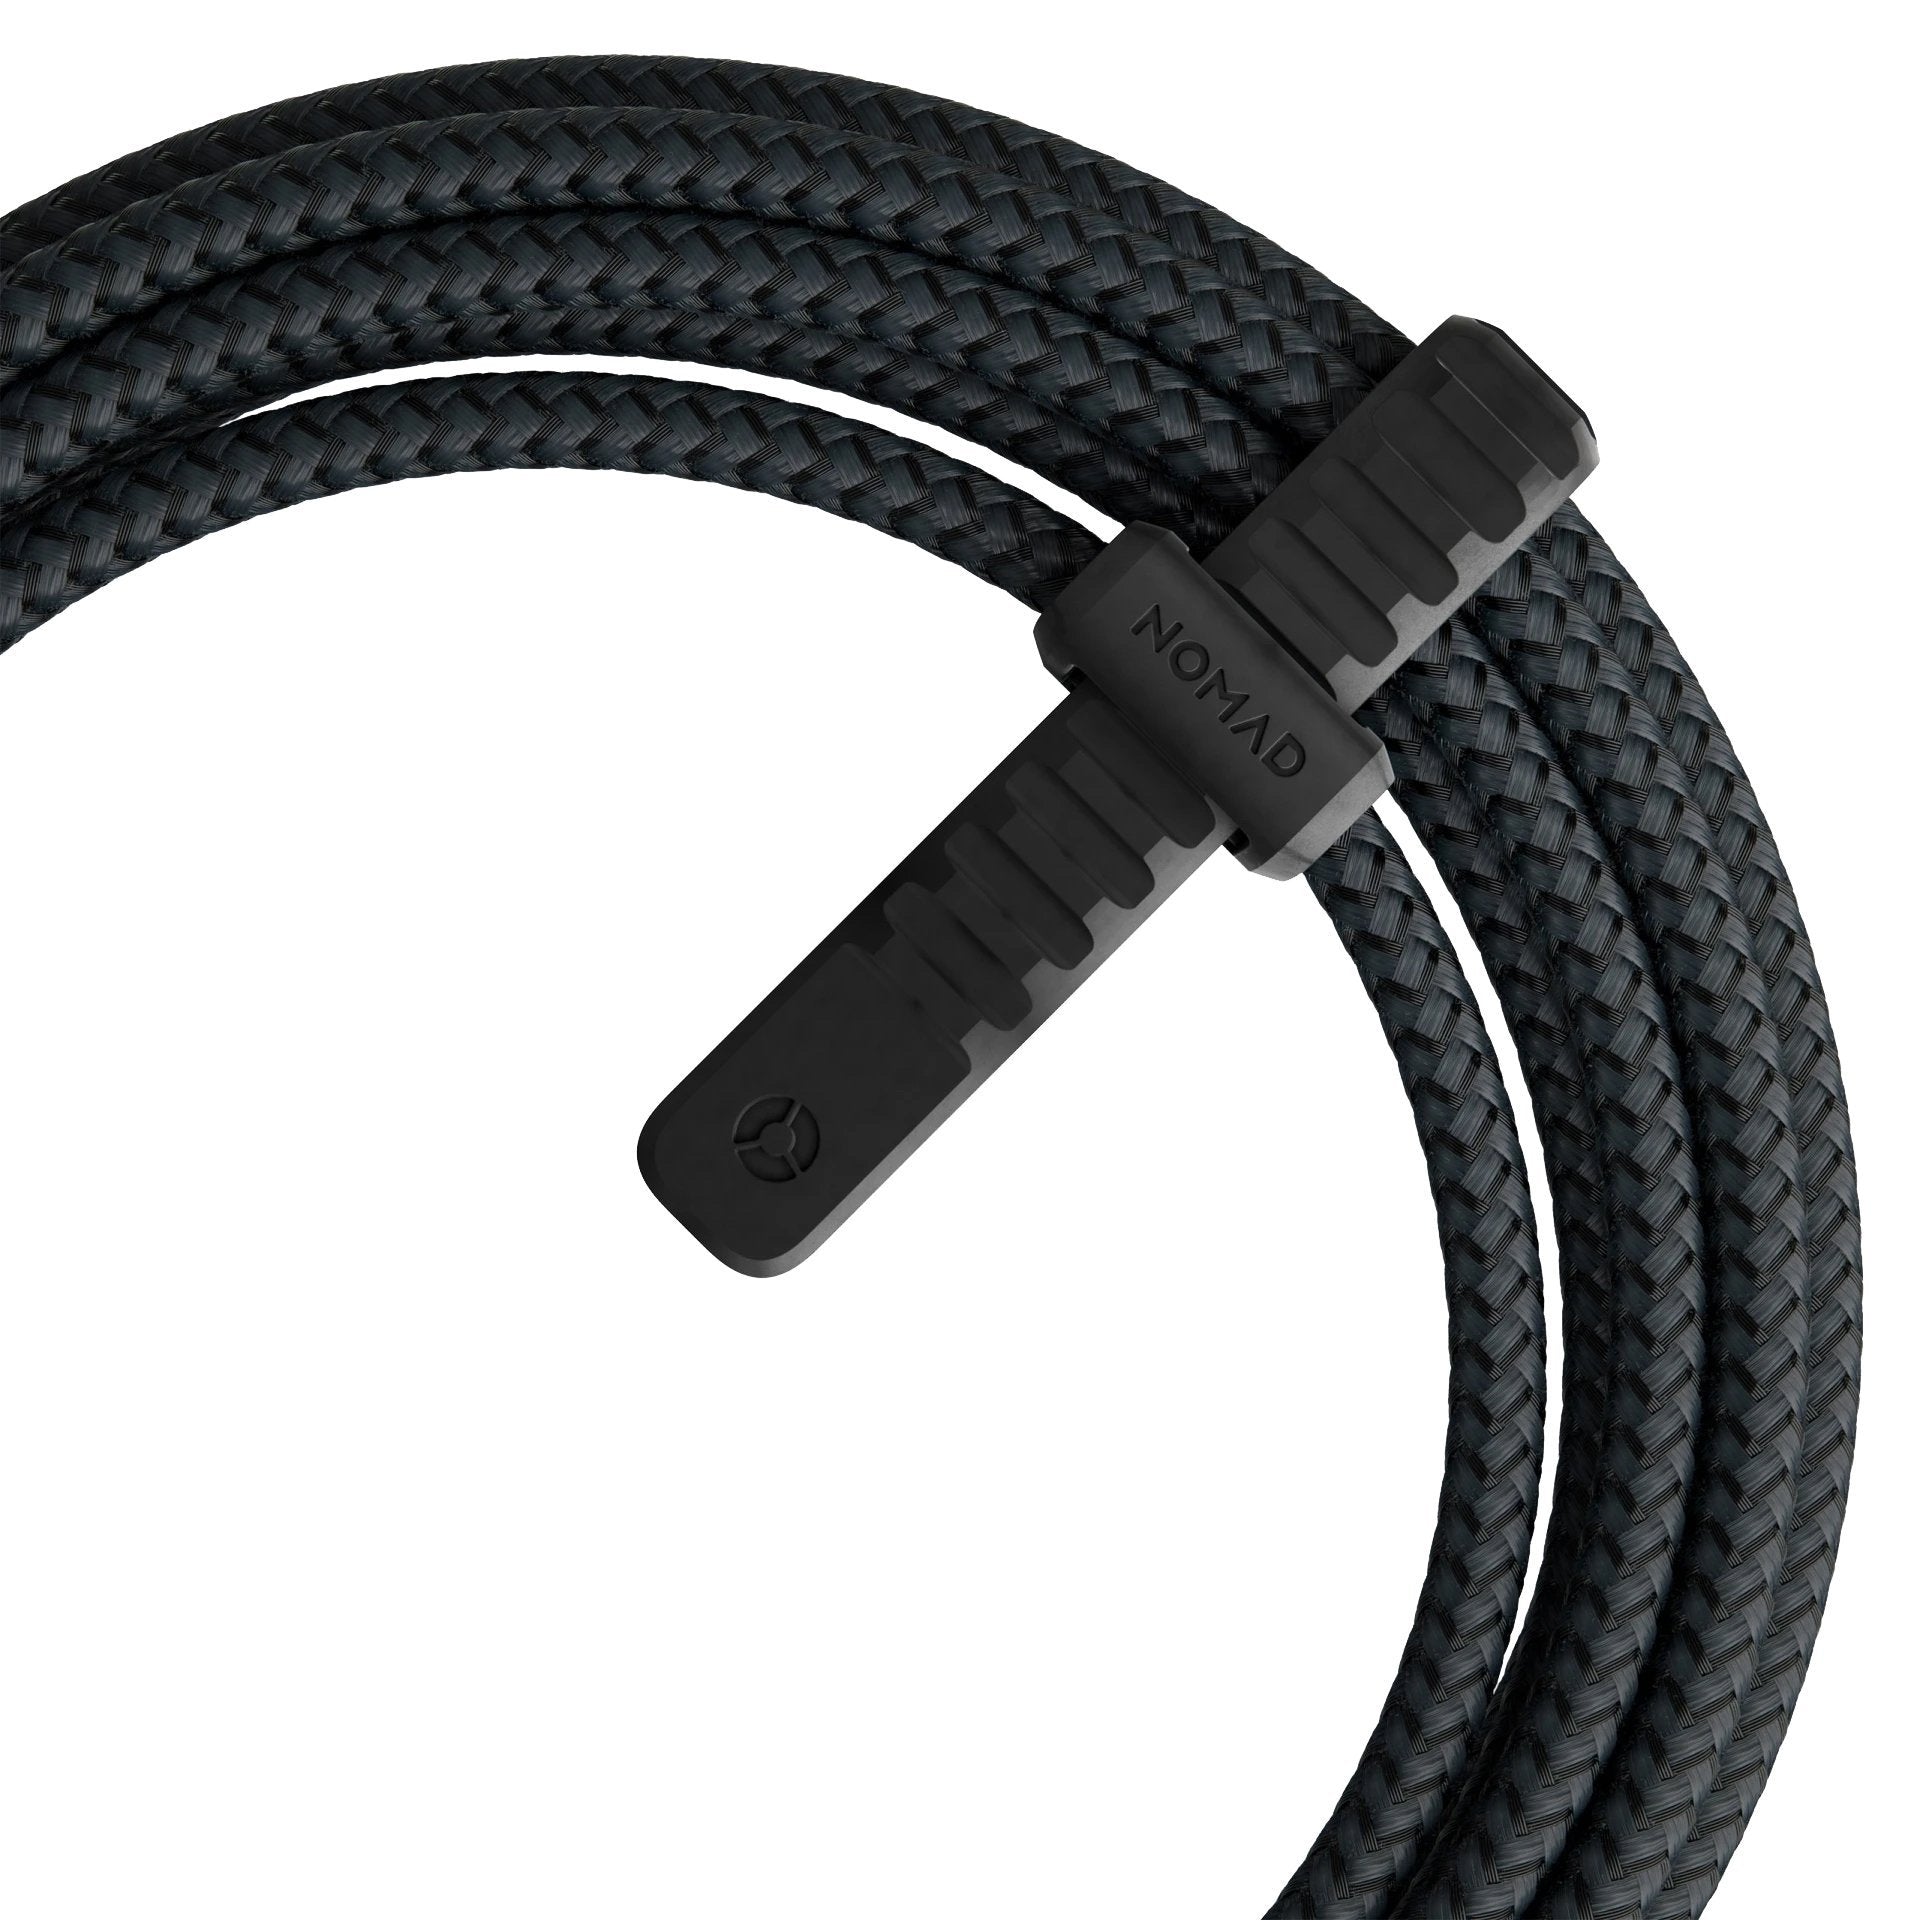 NOMAD Rugged USB-C to Lightning Cables 1.5M, Black Cable NOMAD 